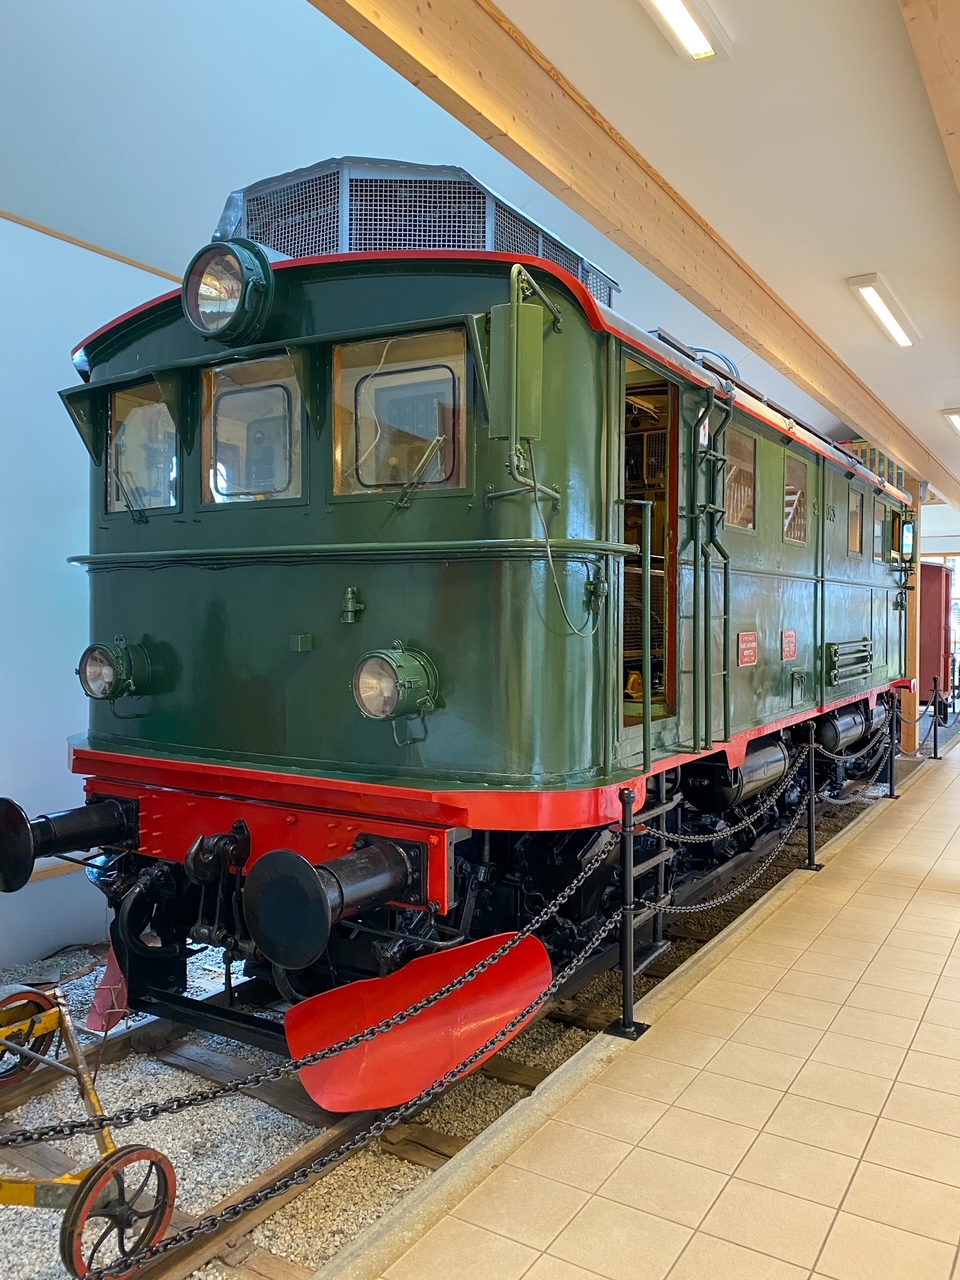 a historical locomotive that's on display at the Flam Railway Museum